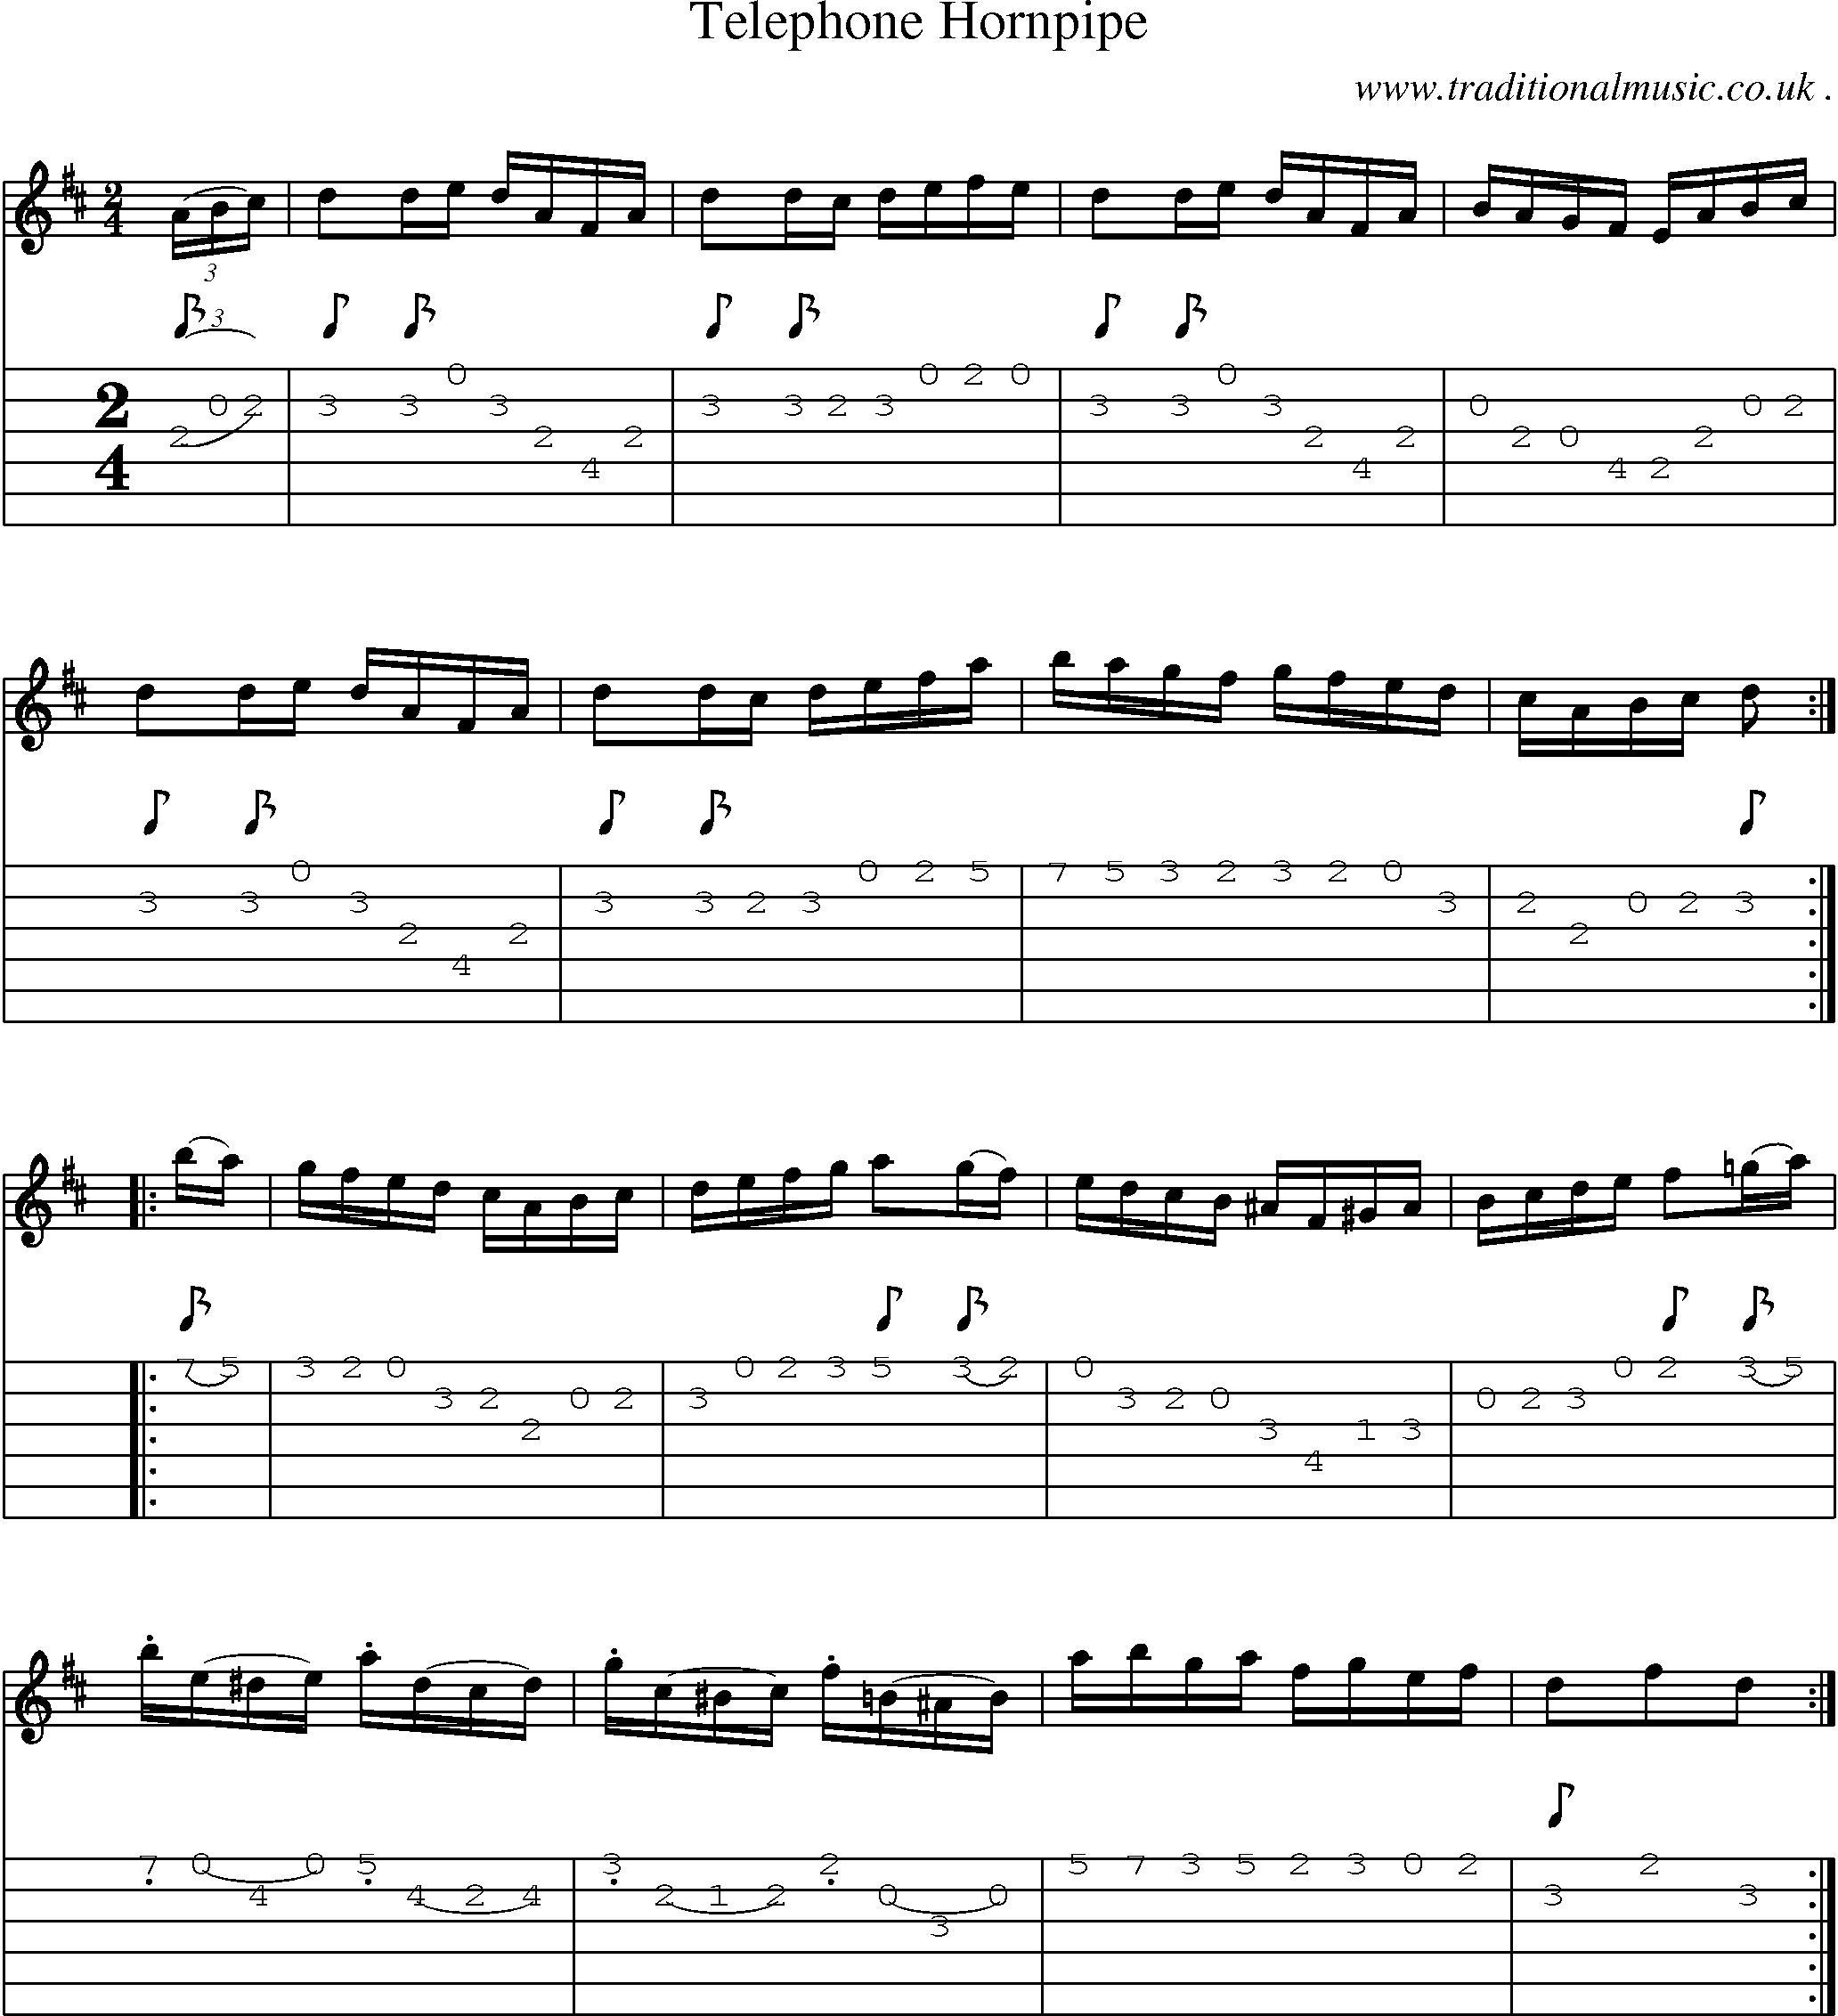 Sheet-Music and Guitar Tabs for Telephone Hornpipe